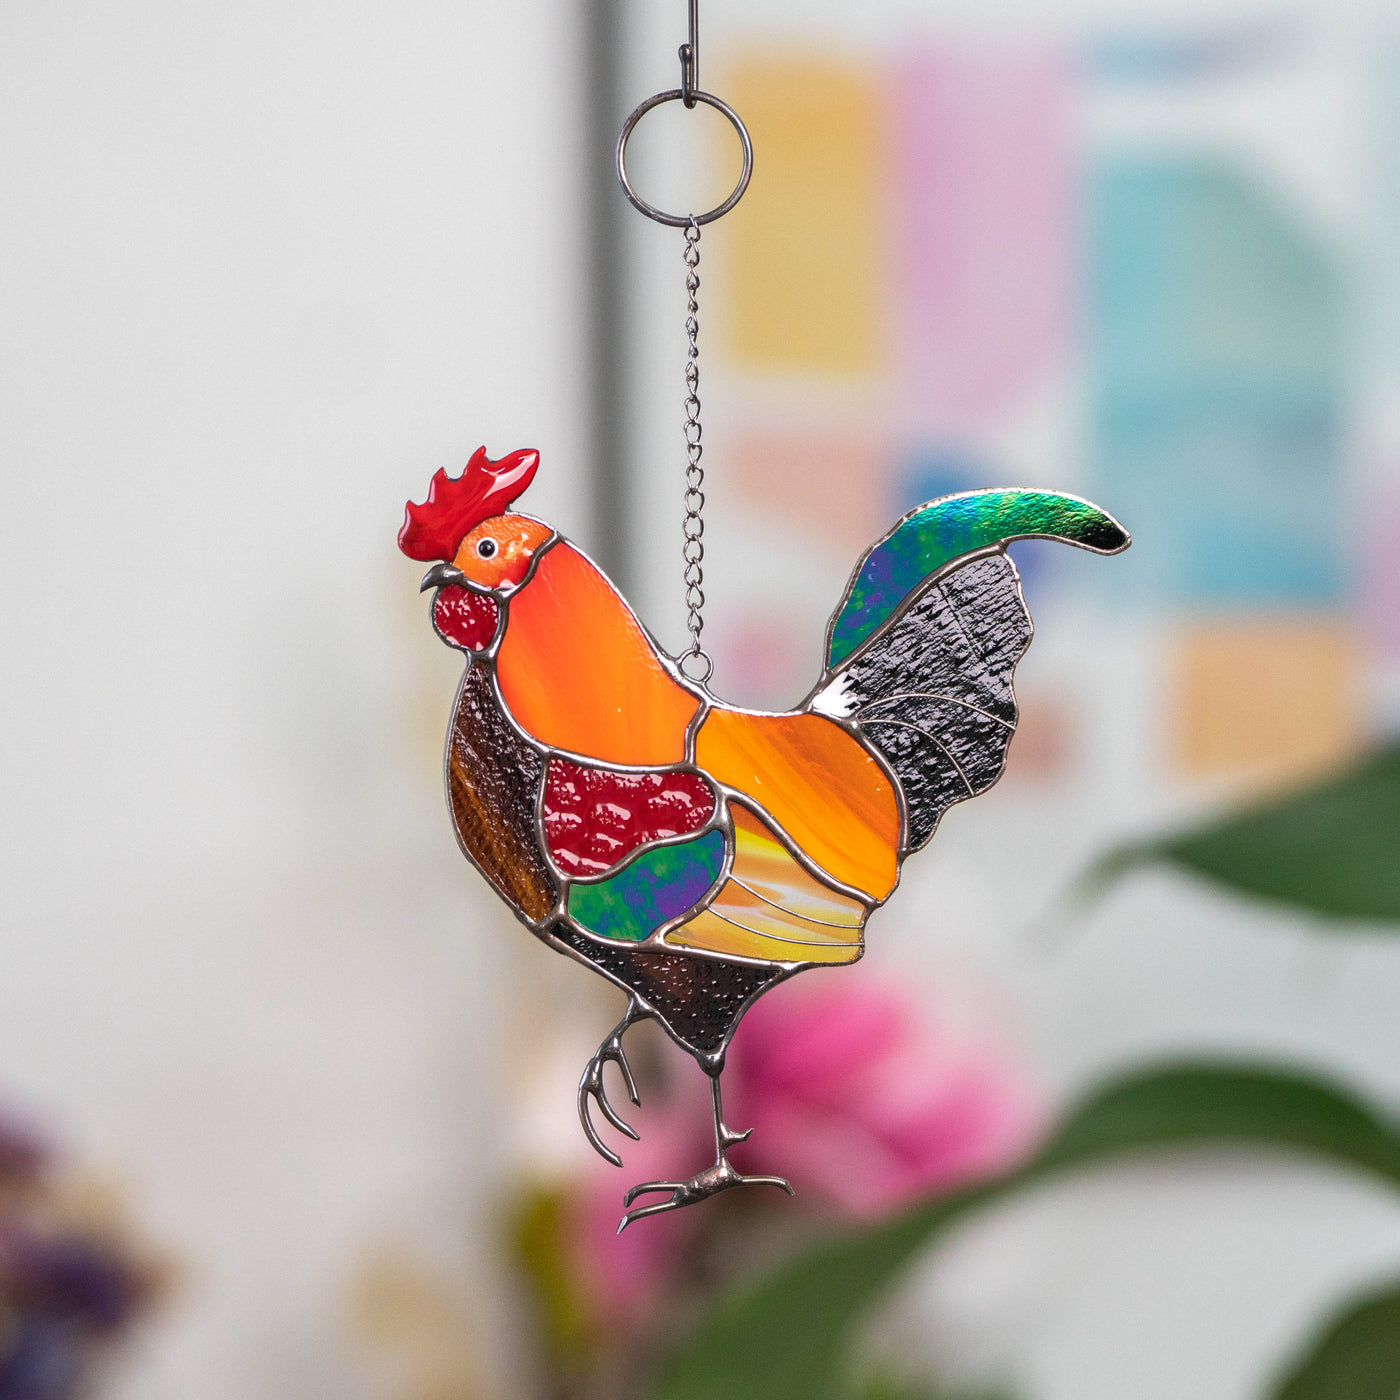 Stained glass window hanging of a rooster with iridescent tail